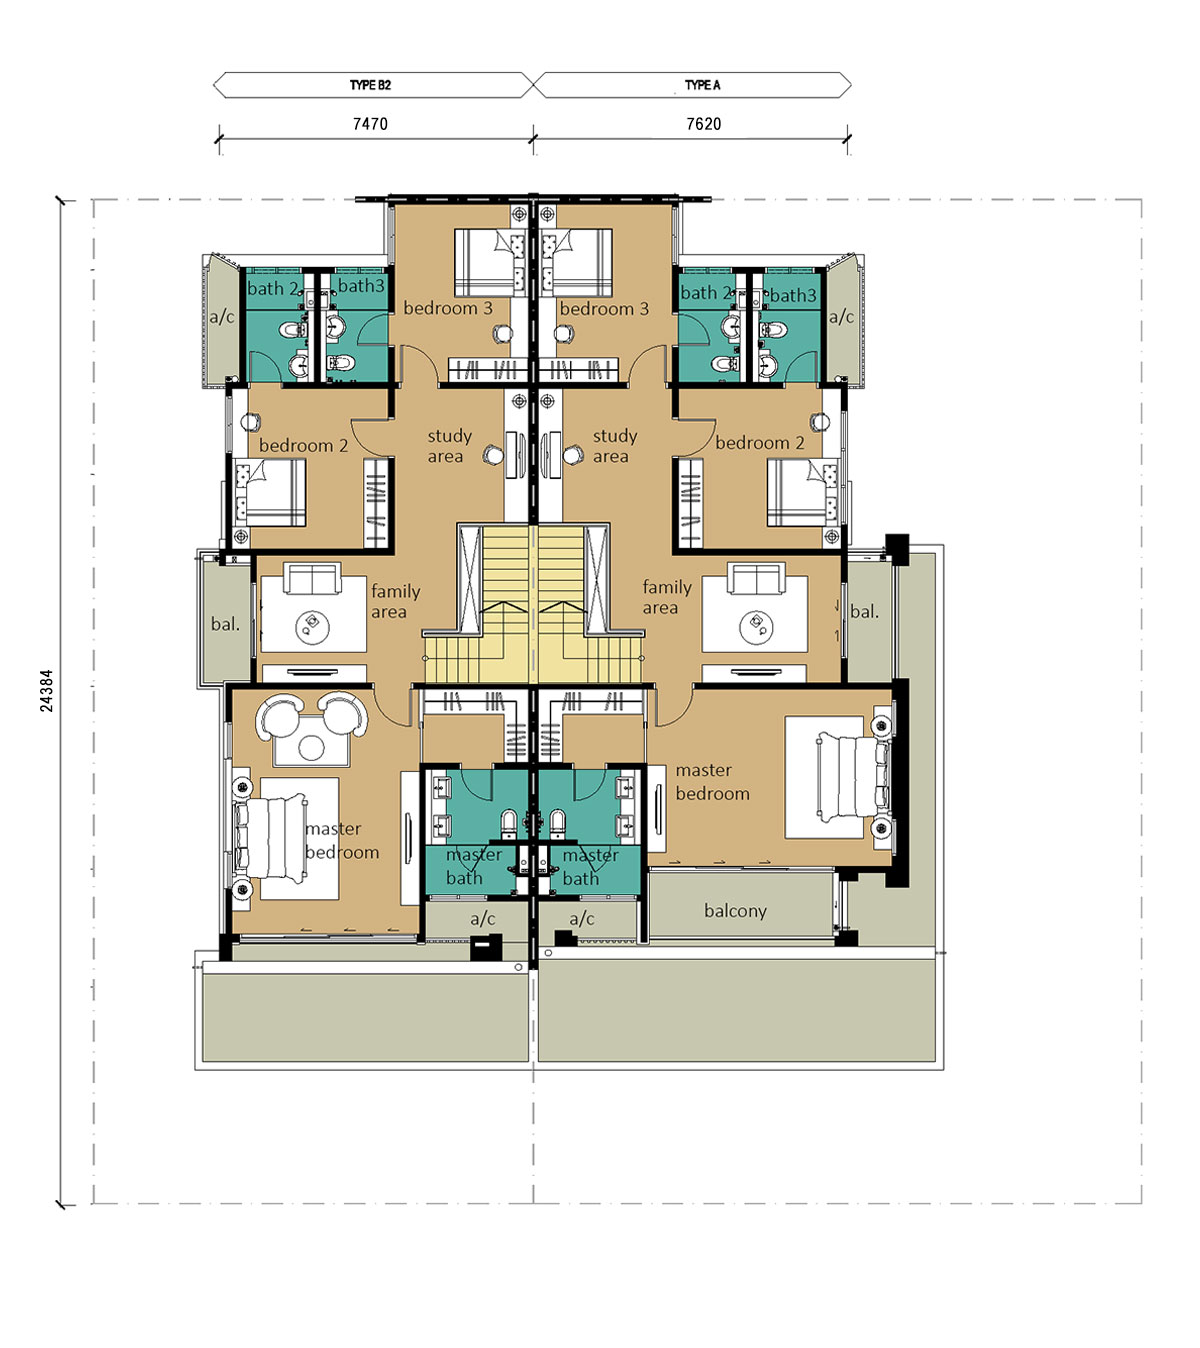 2 Storey - Cluster - Type B2 & A - First Floor